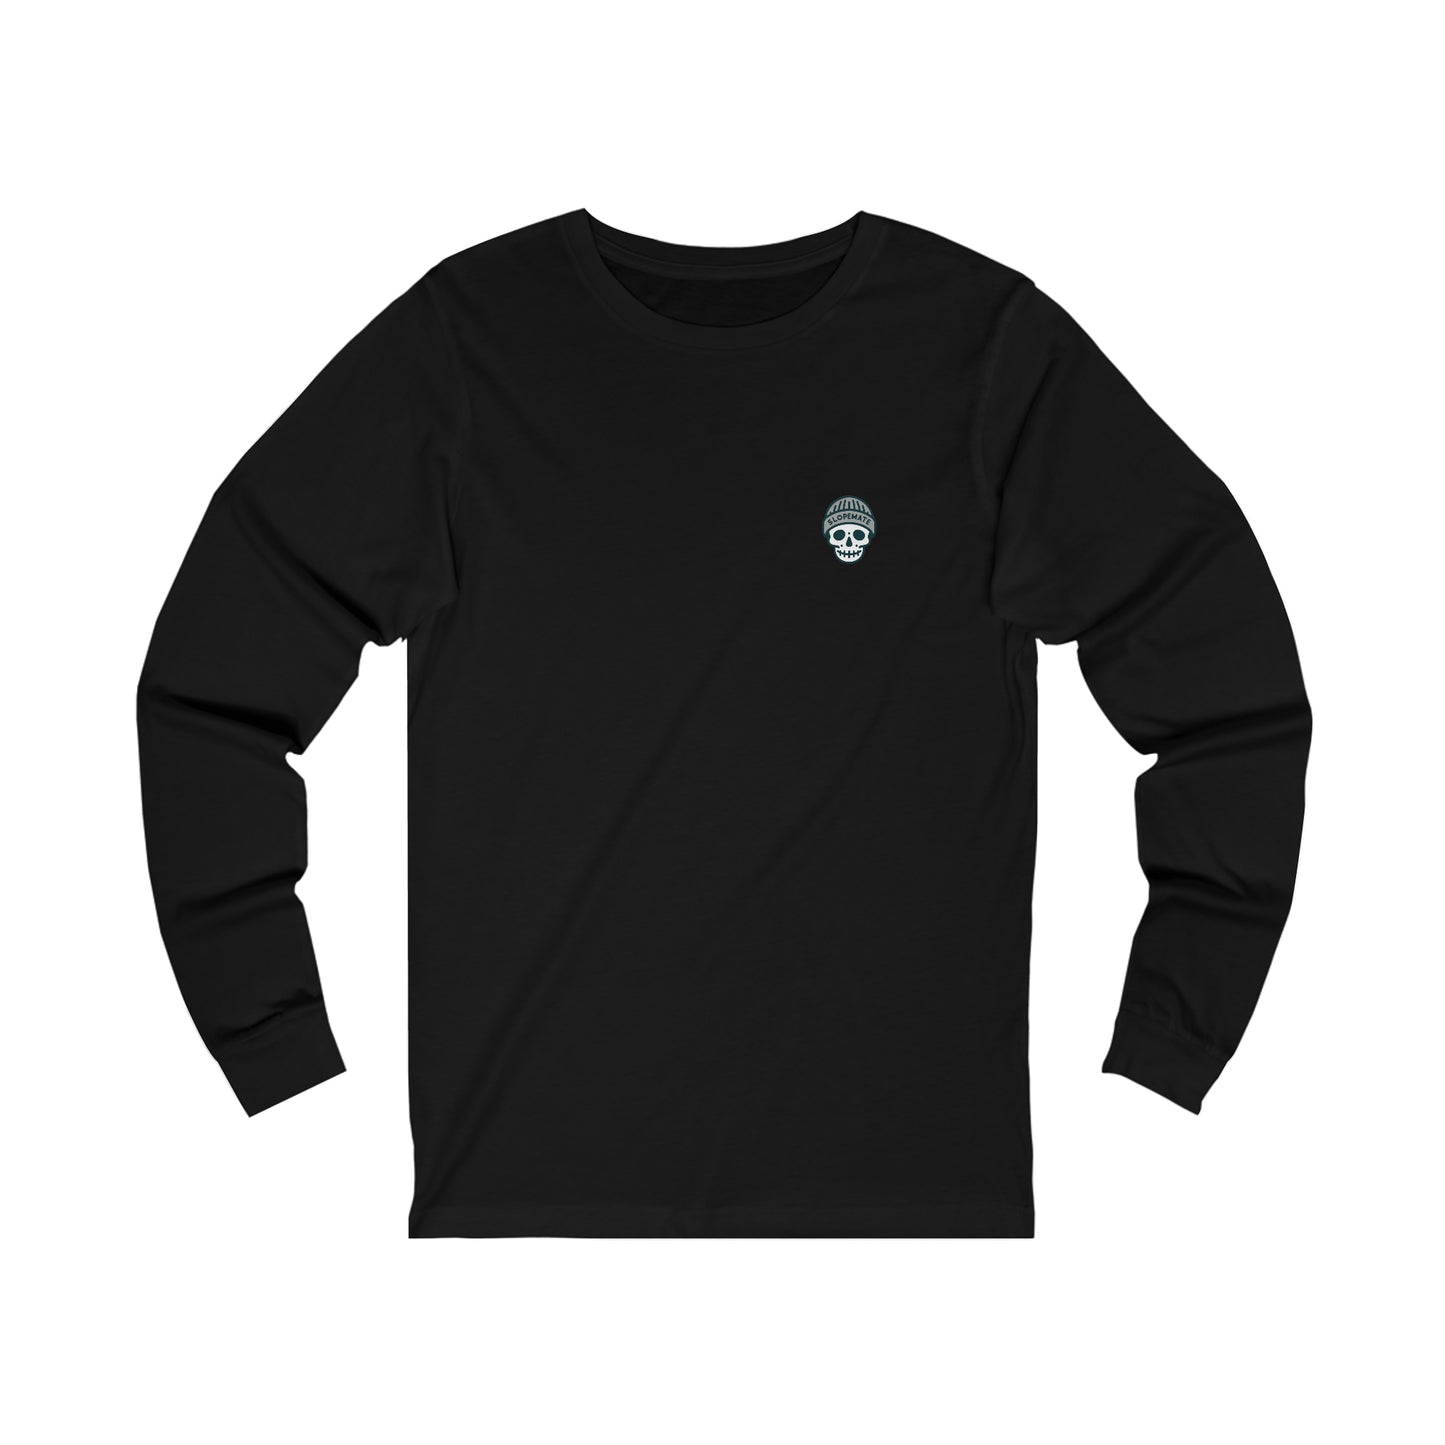 SlopeMate First Tracks Long Sleeve